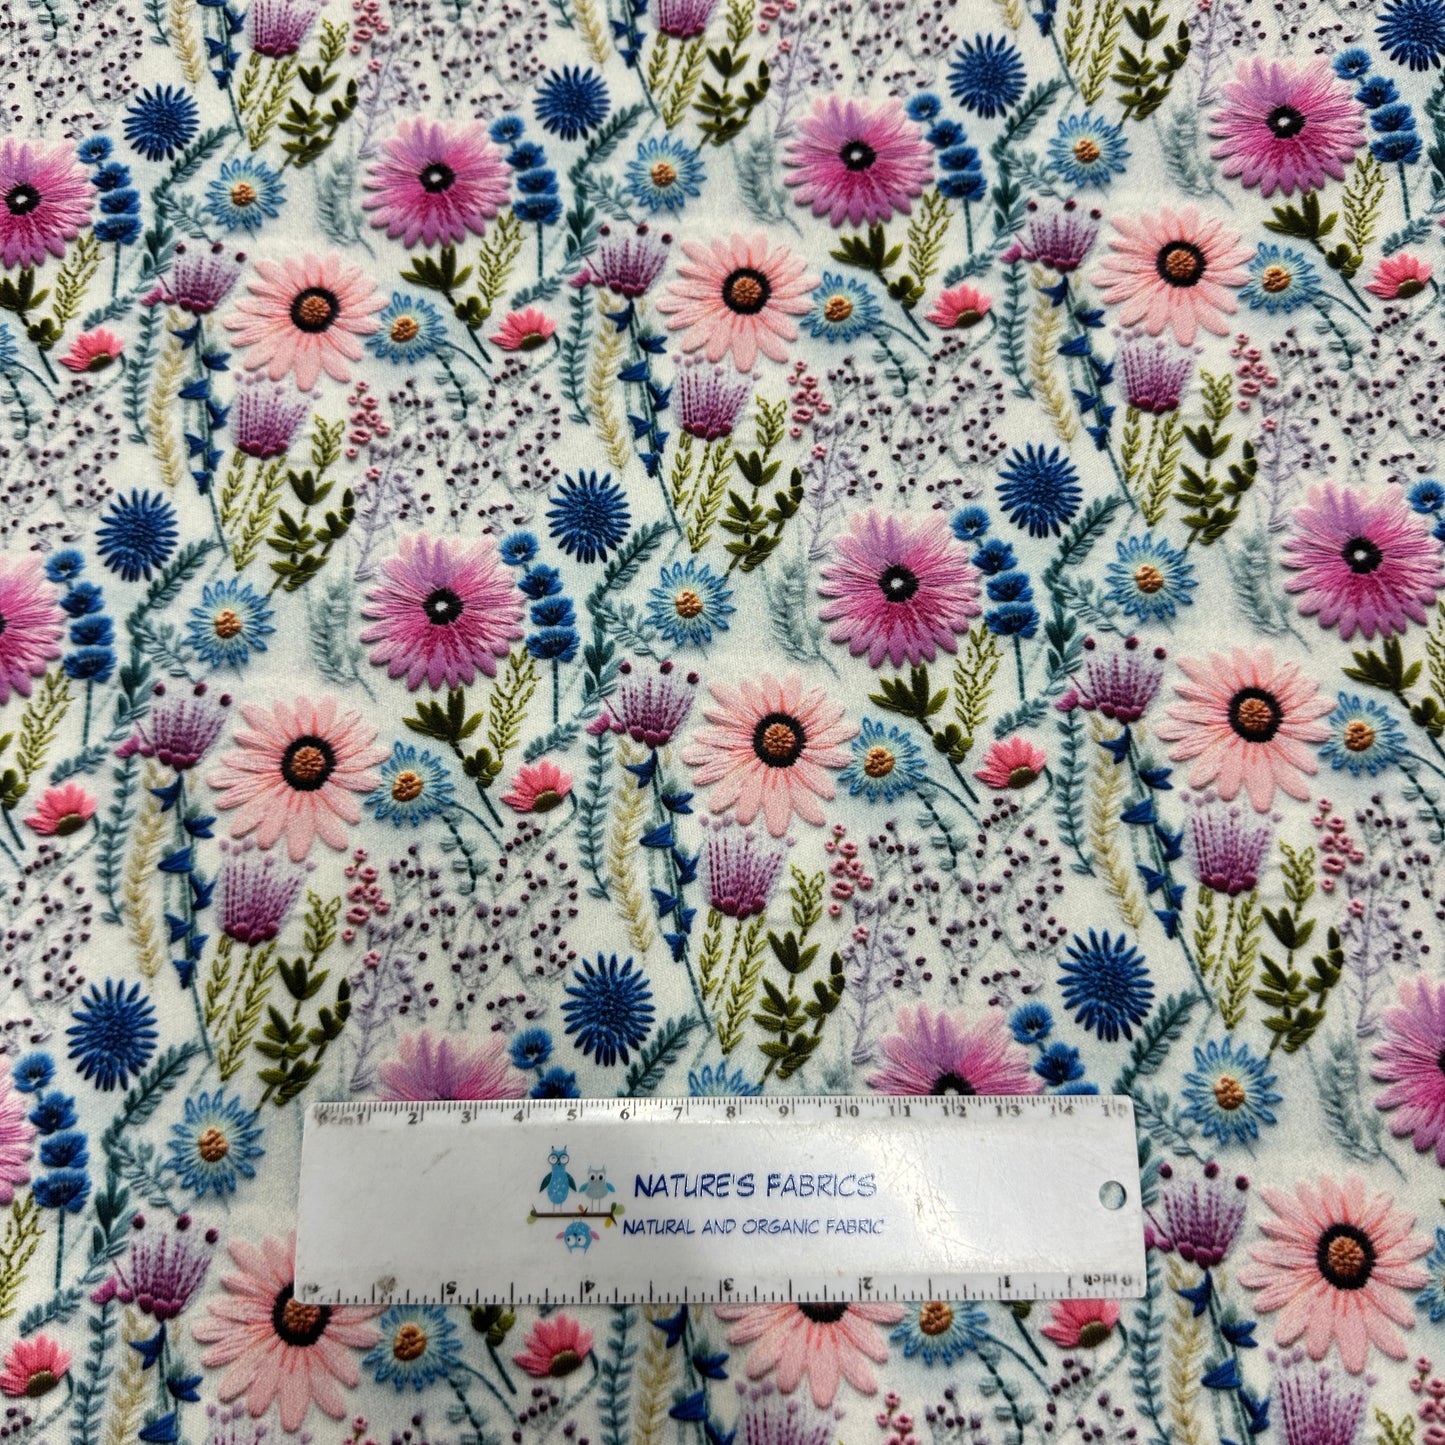 Pink Embroidered Daisies 1 mil PUL Fabric - Made in the USA